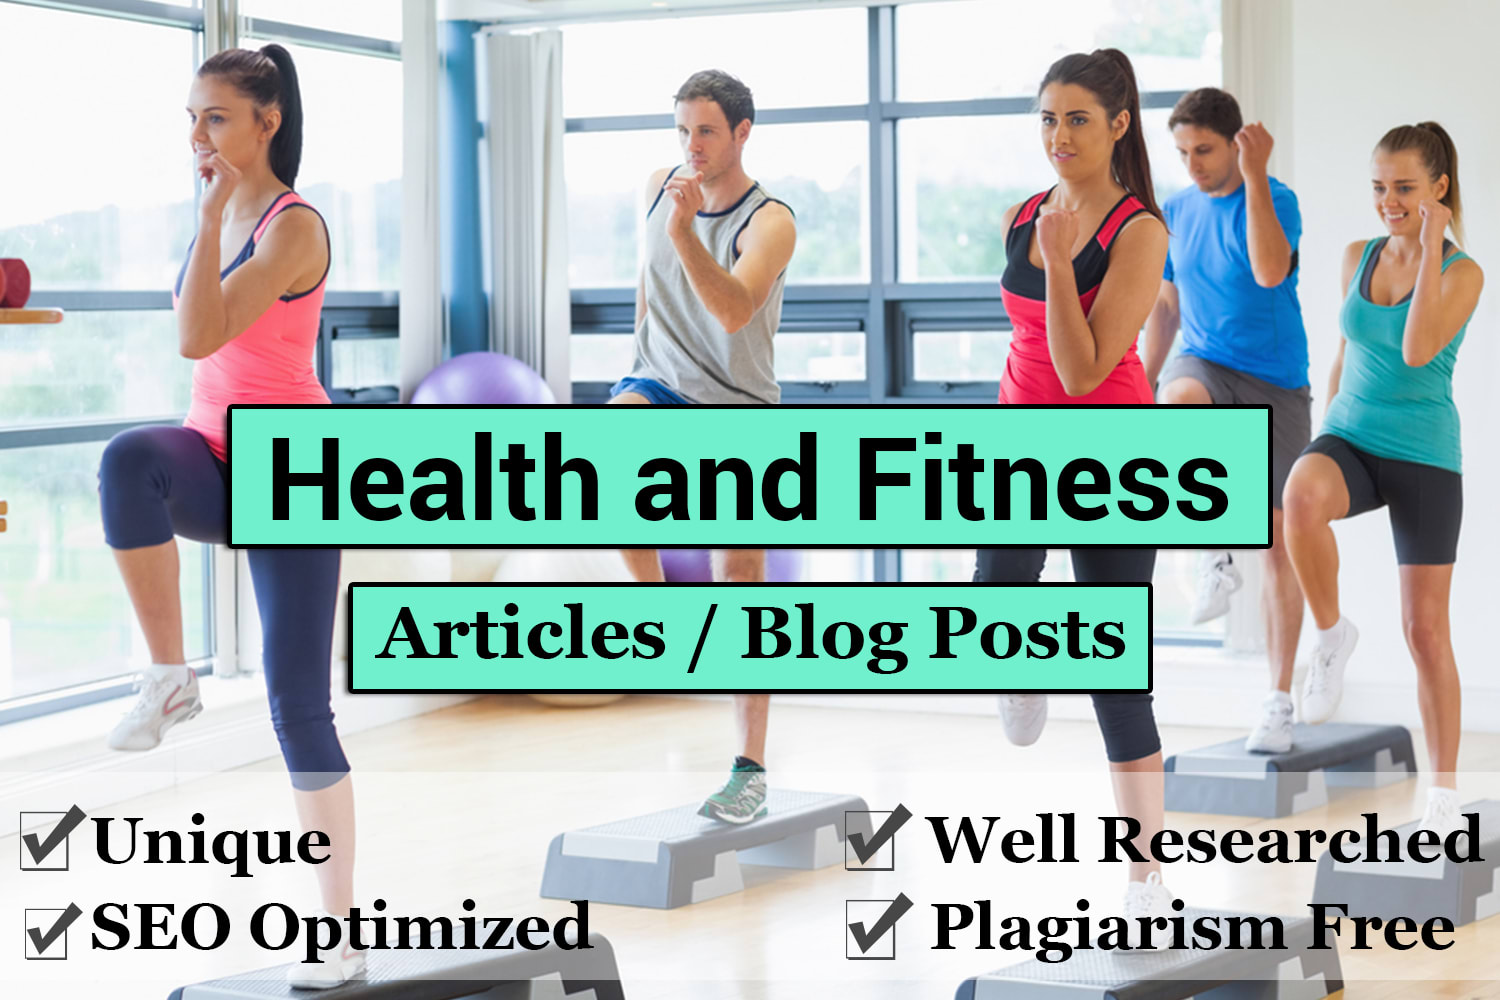 I will write health and fitness articles and blog posts - AnyTask.com